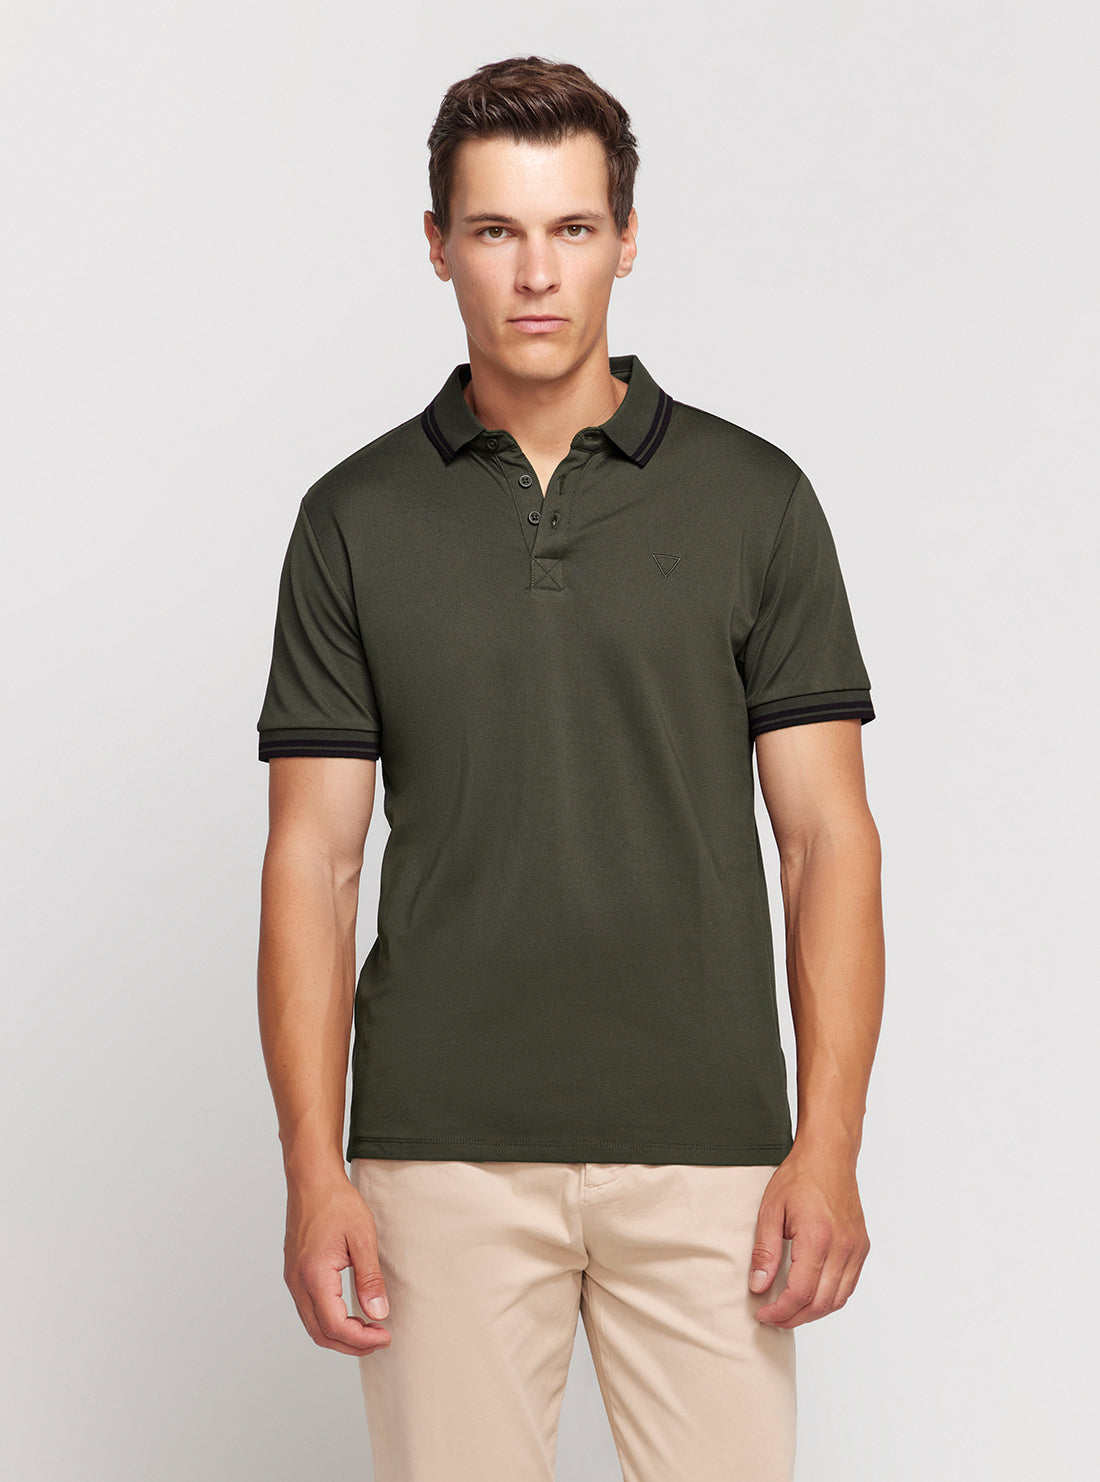 GUESS Brown Short Sleeve Pique Polo Shirt front view